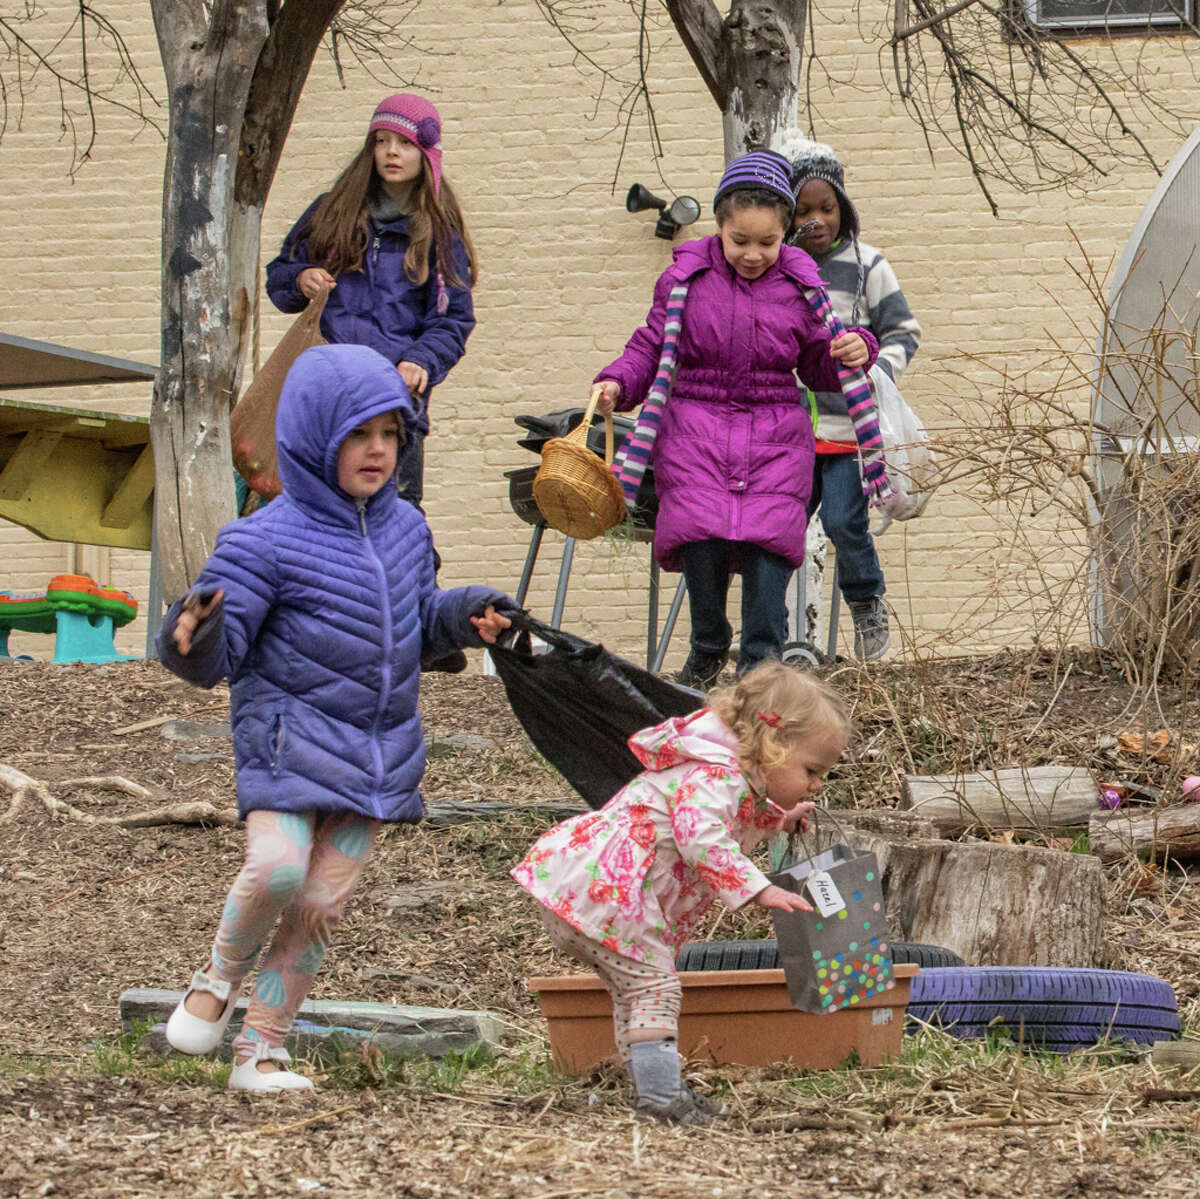 Children and their parents turned out on Easter Sunday for an egg hunt at Gabi?s Community Garden on the corner of Wilbur and Grand streets in Albany?s Mansion Neighborhood. Caleb Tenerowitz, top right, is equipped with a big basket as he waits for the hunt to start. Above, four girls and a boy are on the move looking to fill their baskets and bags with plastic eggs holding chocolate and other treats. Elke van der Laan, at right, smiles with a full basket. Lily Mercogliano and David Easton organized the event with the help of their neighbors. A fine time was had by all despite the cold and rainy weather.